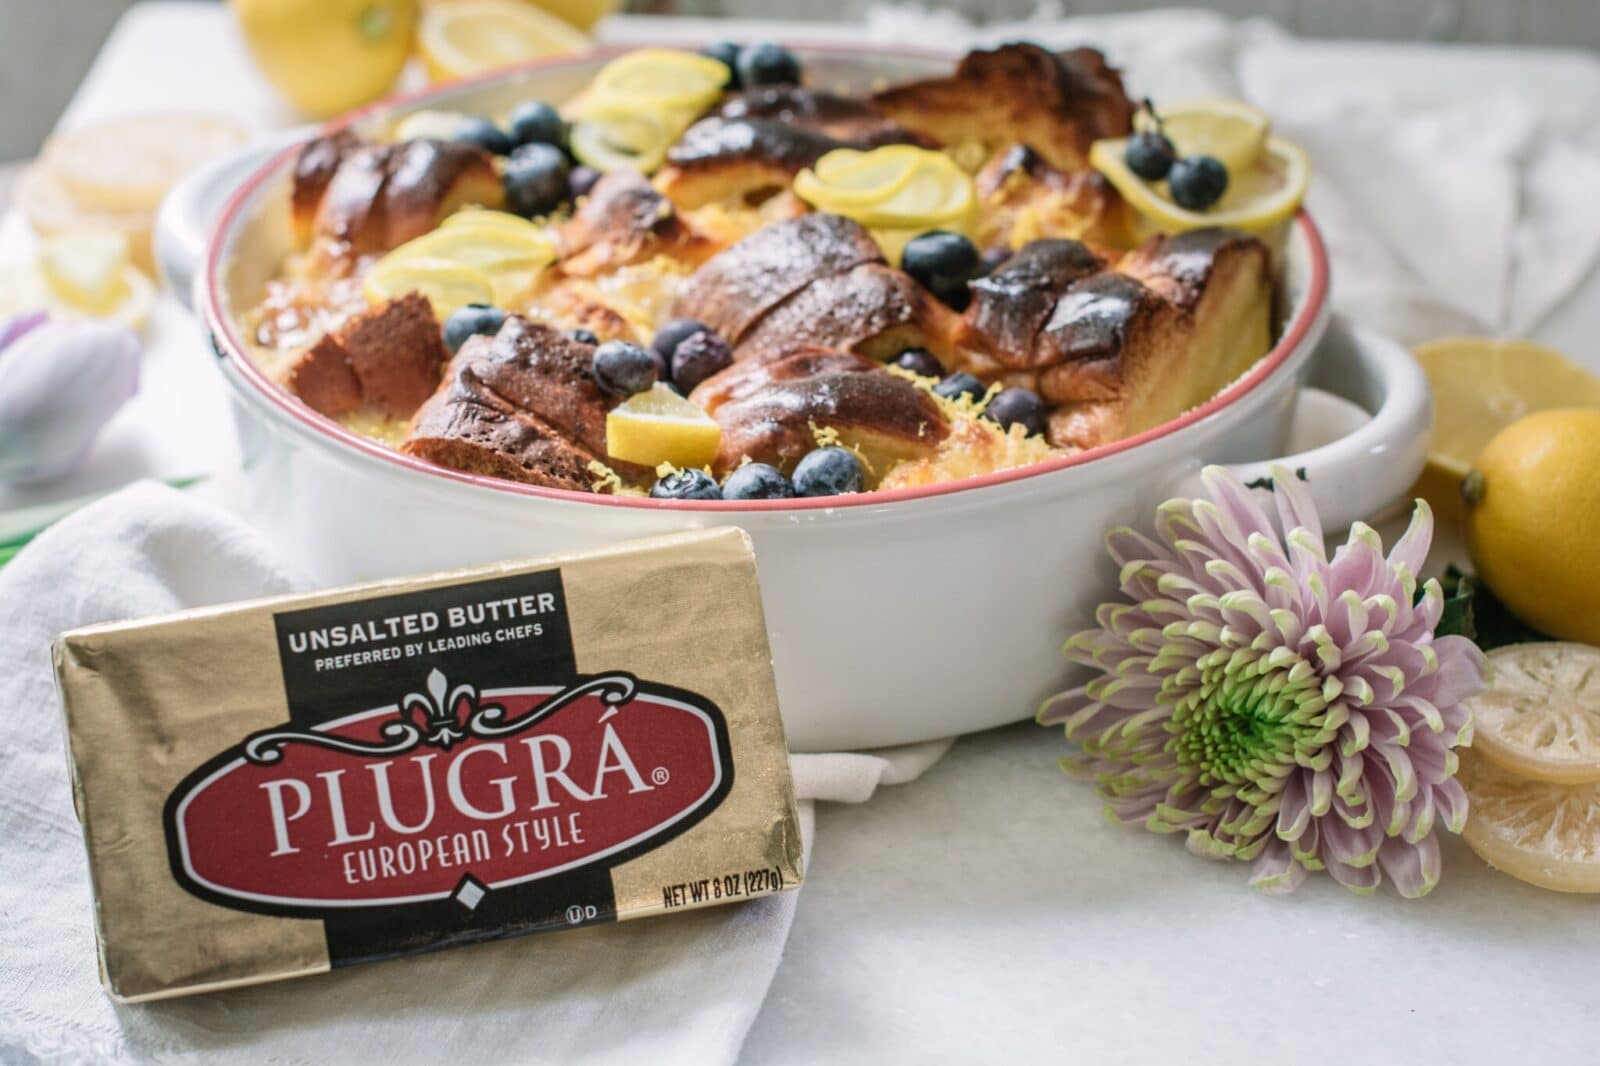 Plugra unsalted butter on white table with brioche bread pudding